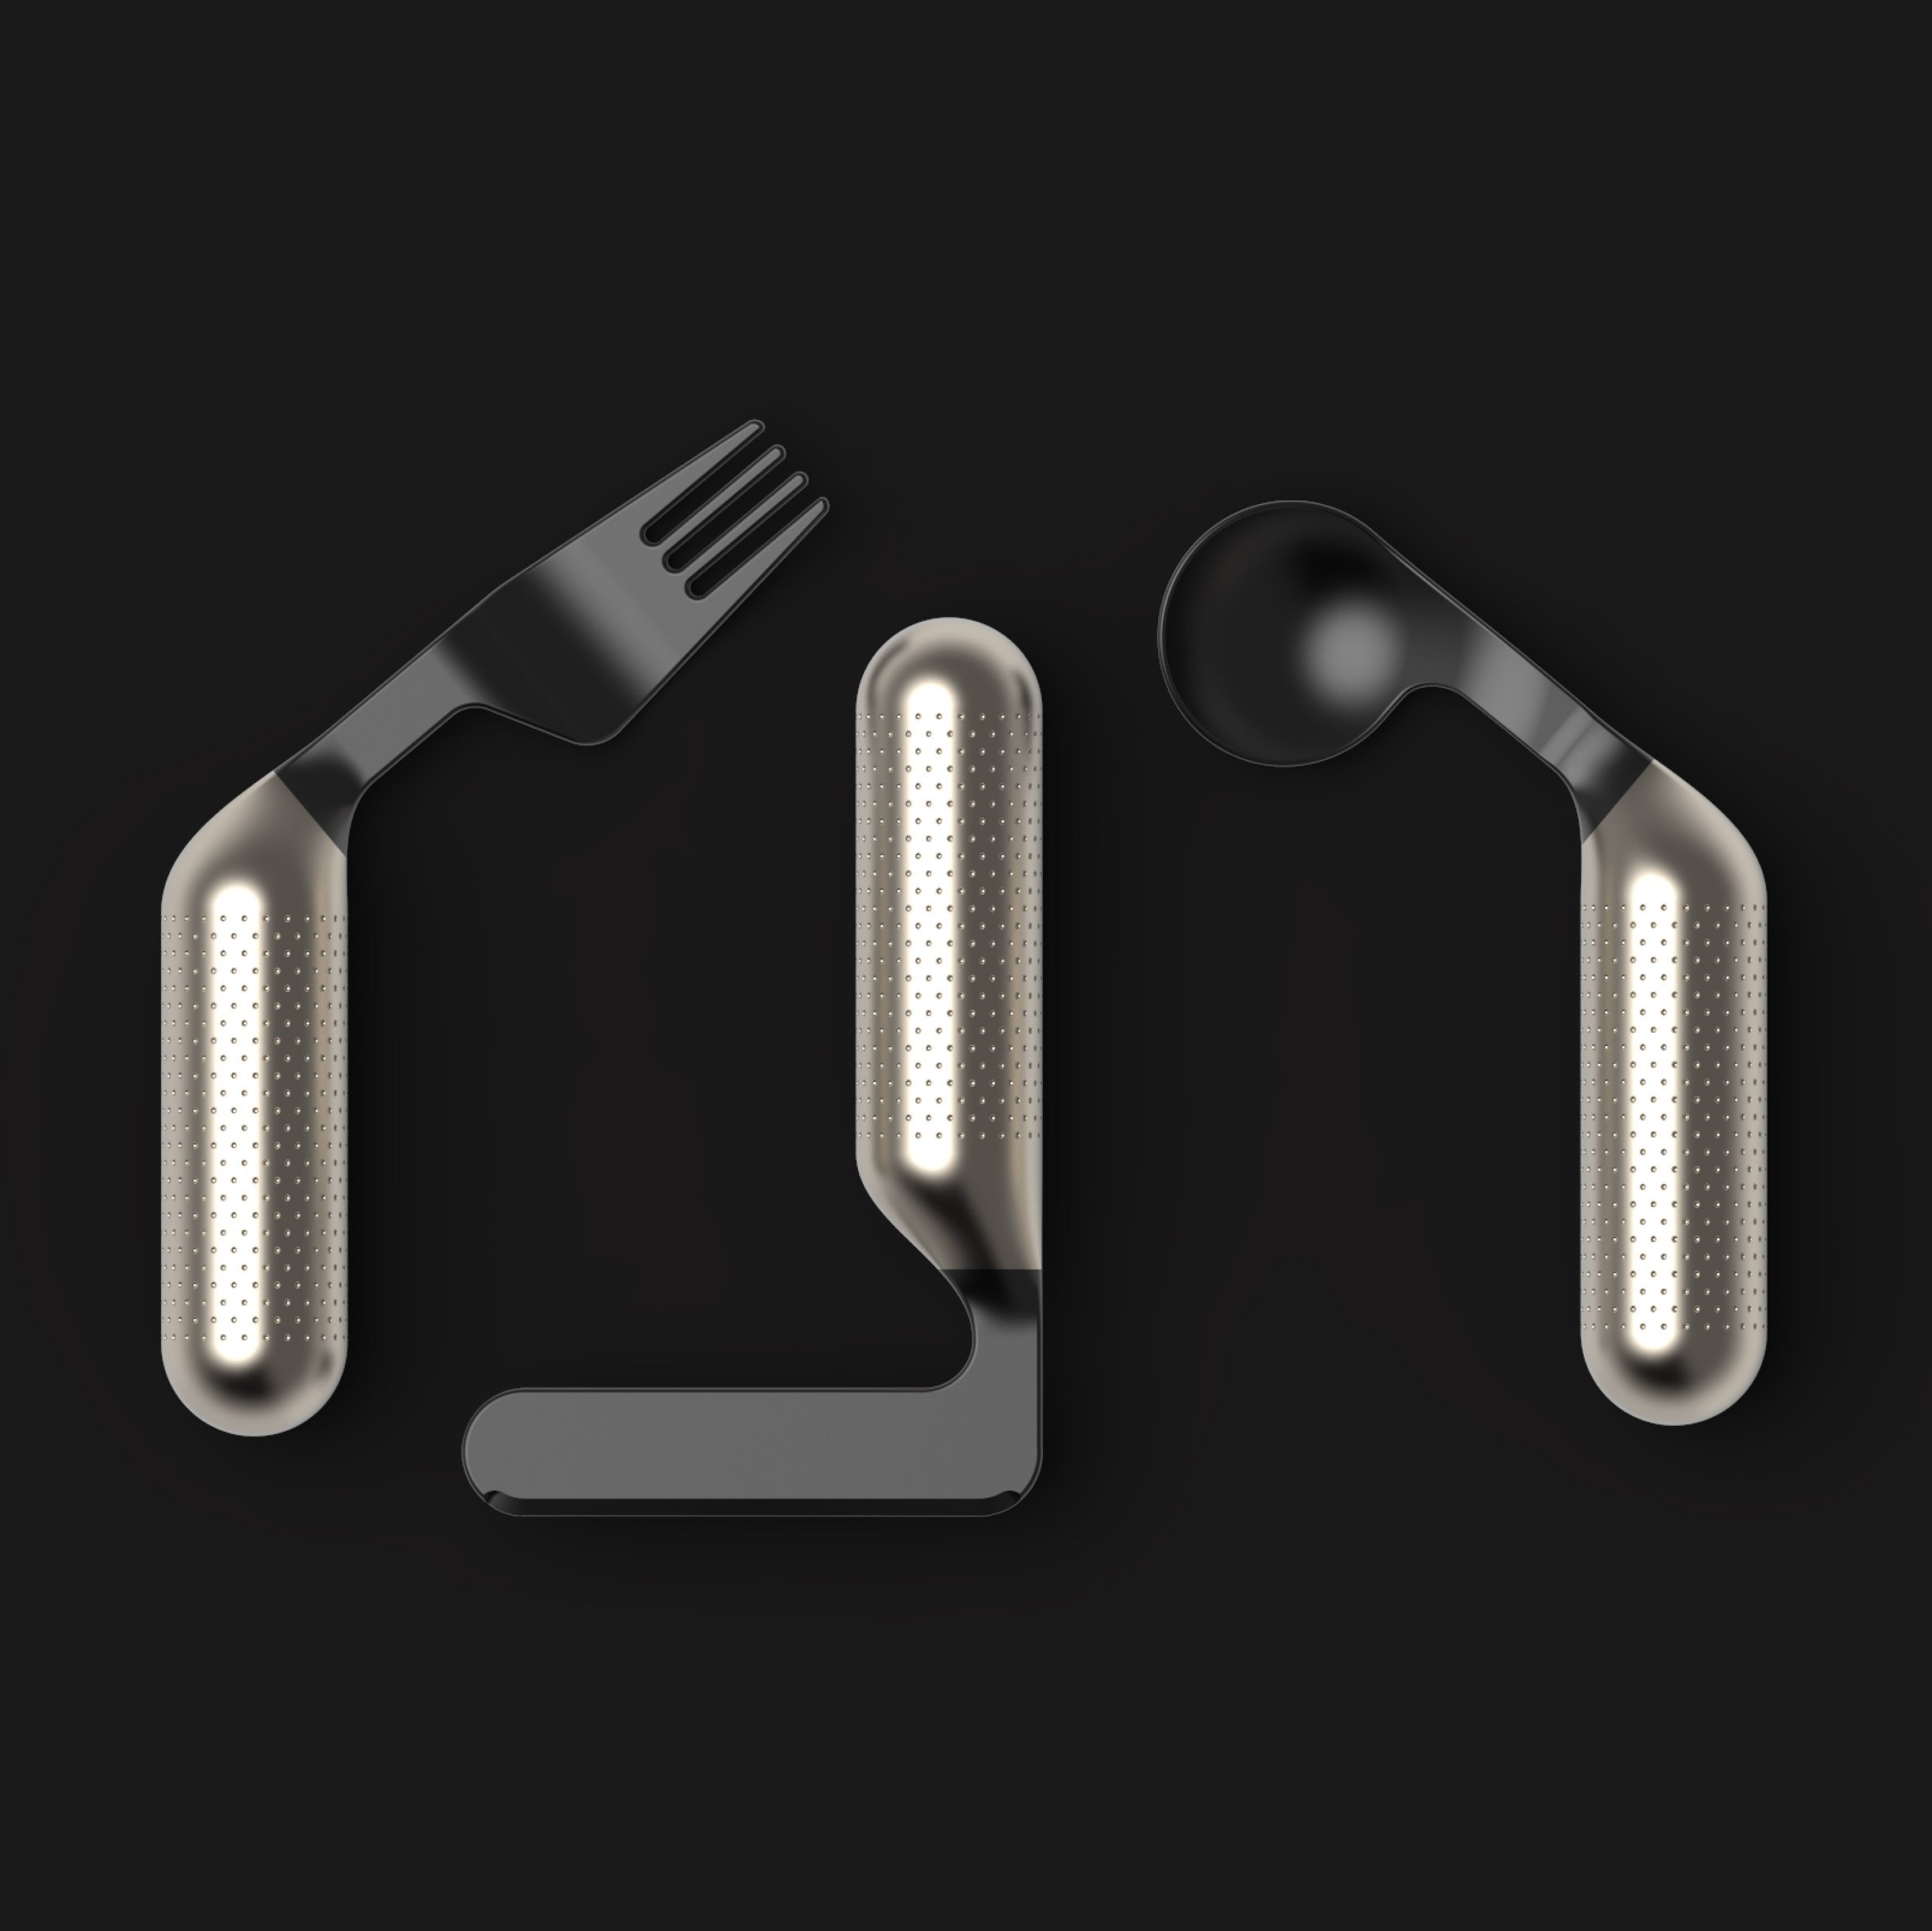 font-a-font-like-cutlery-collection-for-accessibility-and-aesthetics-2 Font: A Font-like Cutlery Collection for Accessibility and Aesthetics